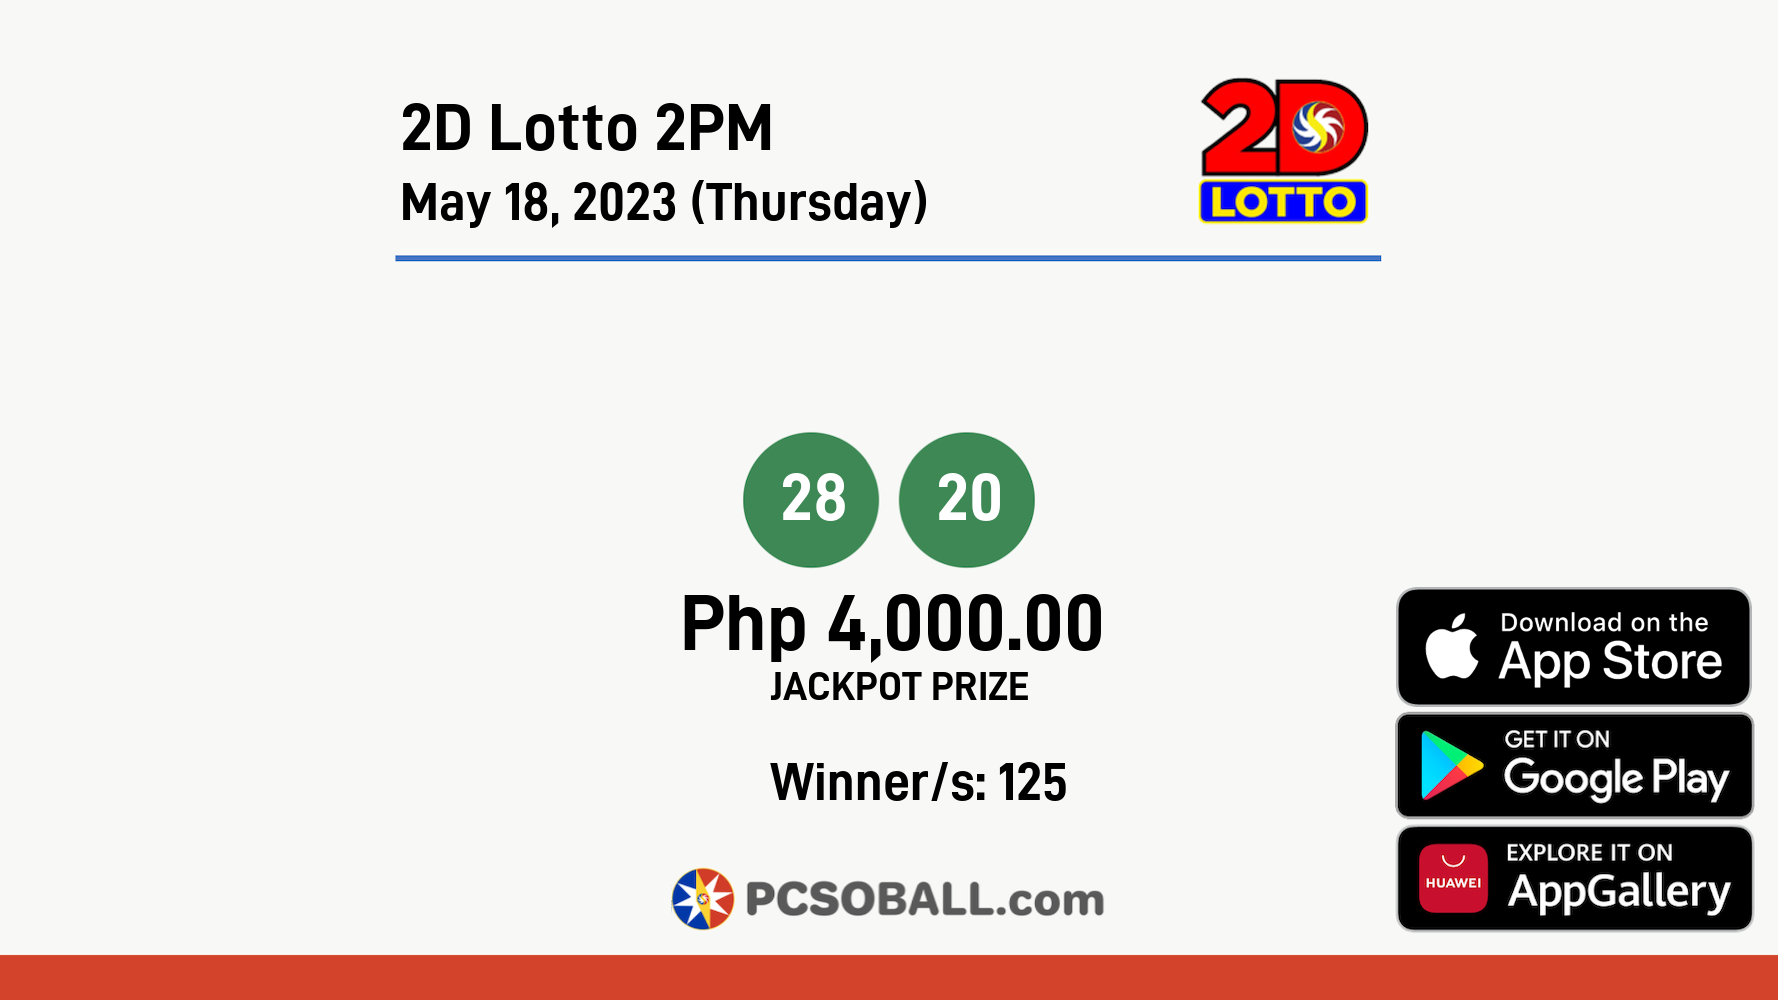 2D Lotto 2PM May 18, 2023 (Thursday) Result